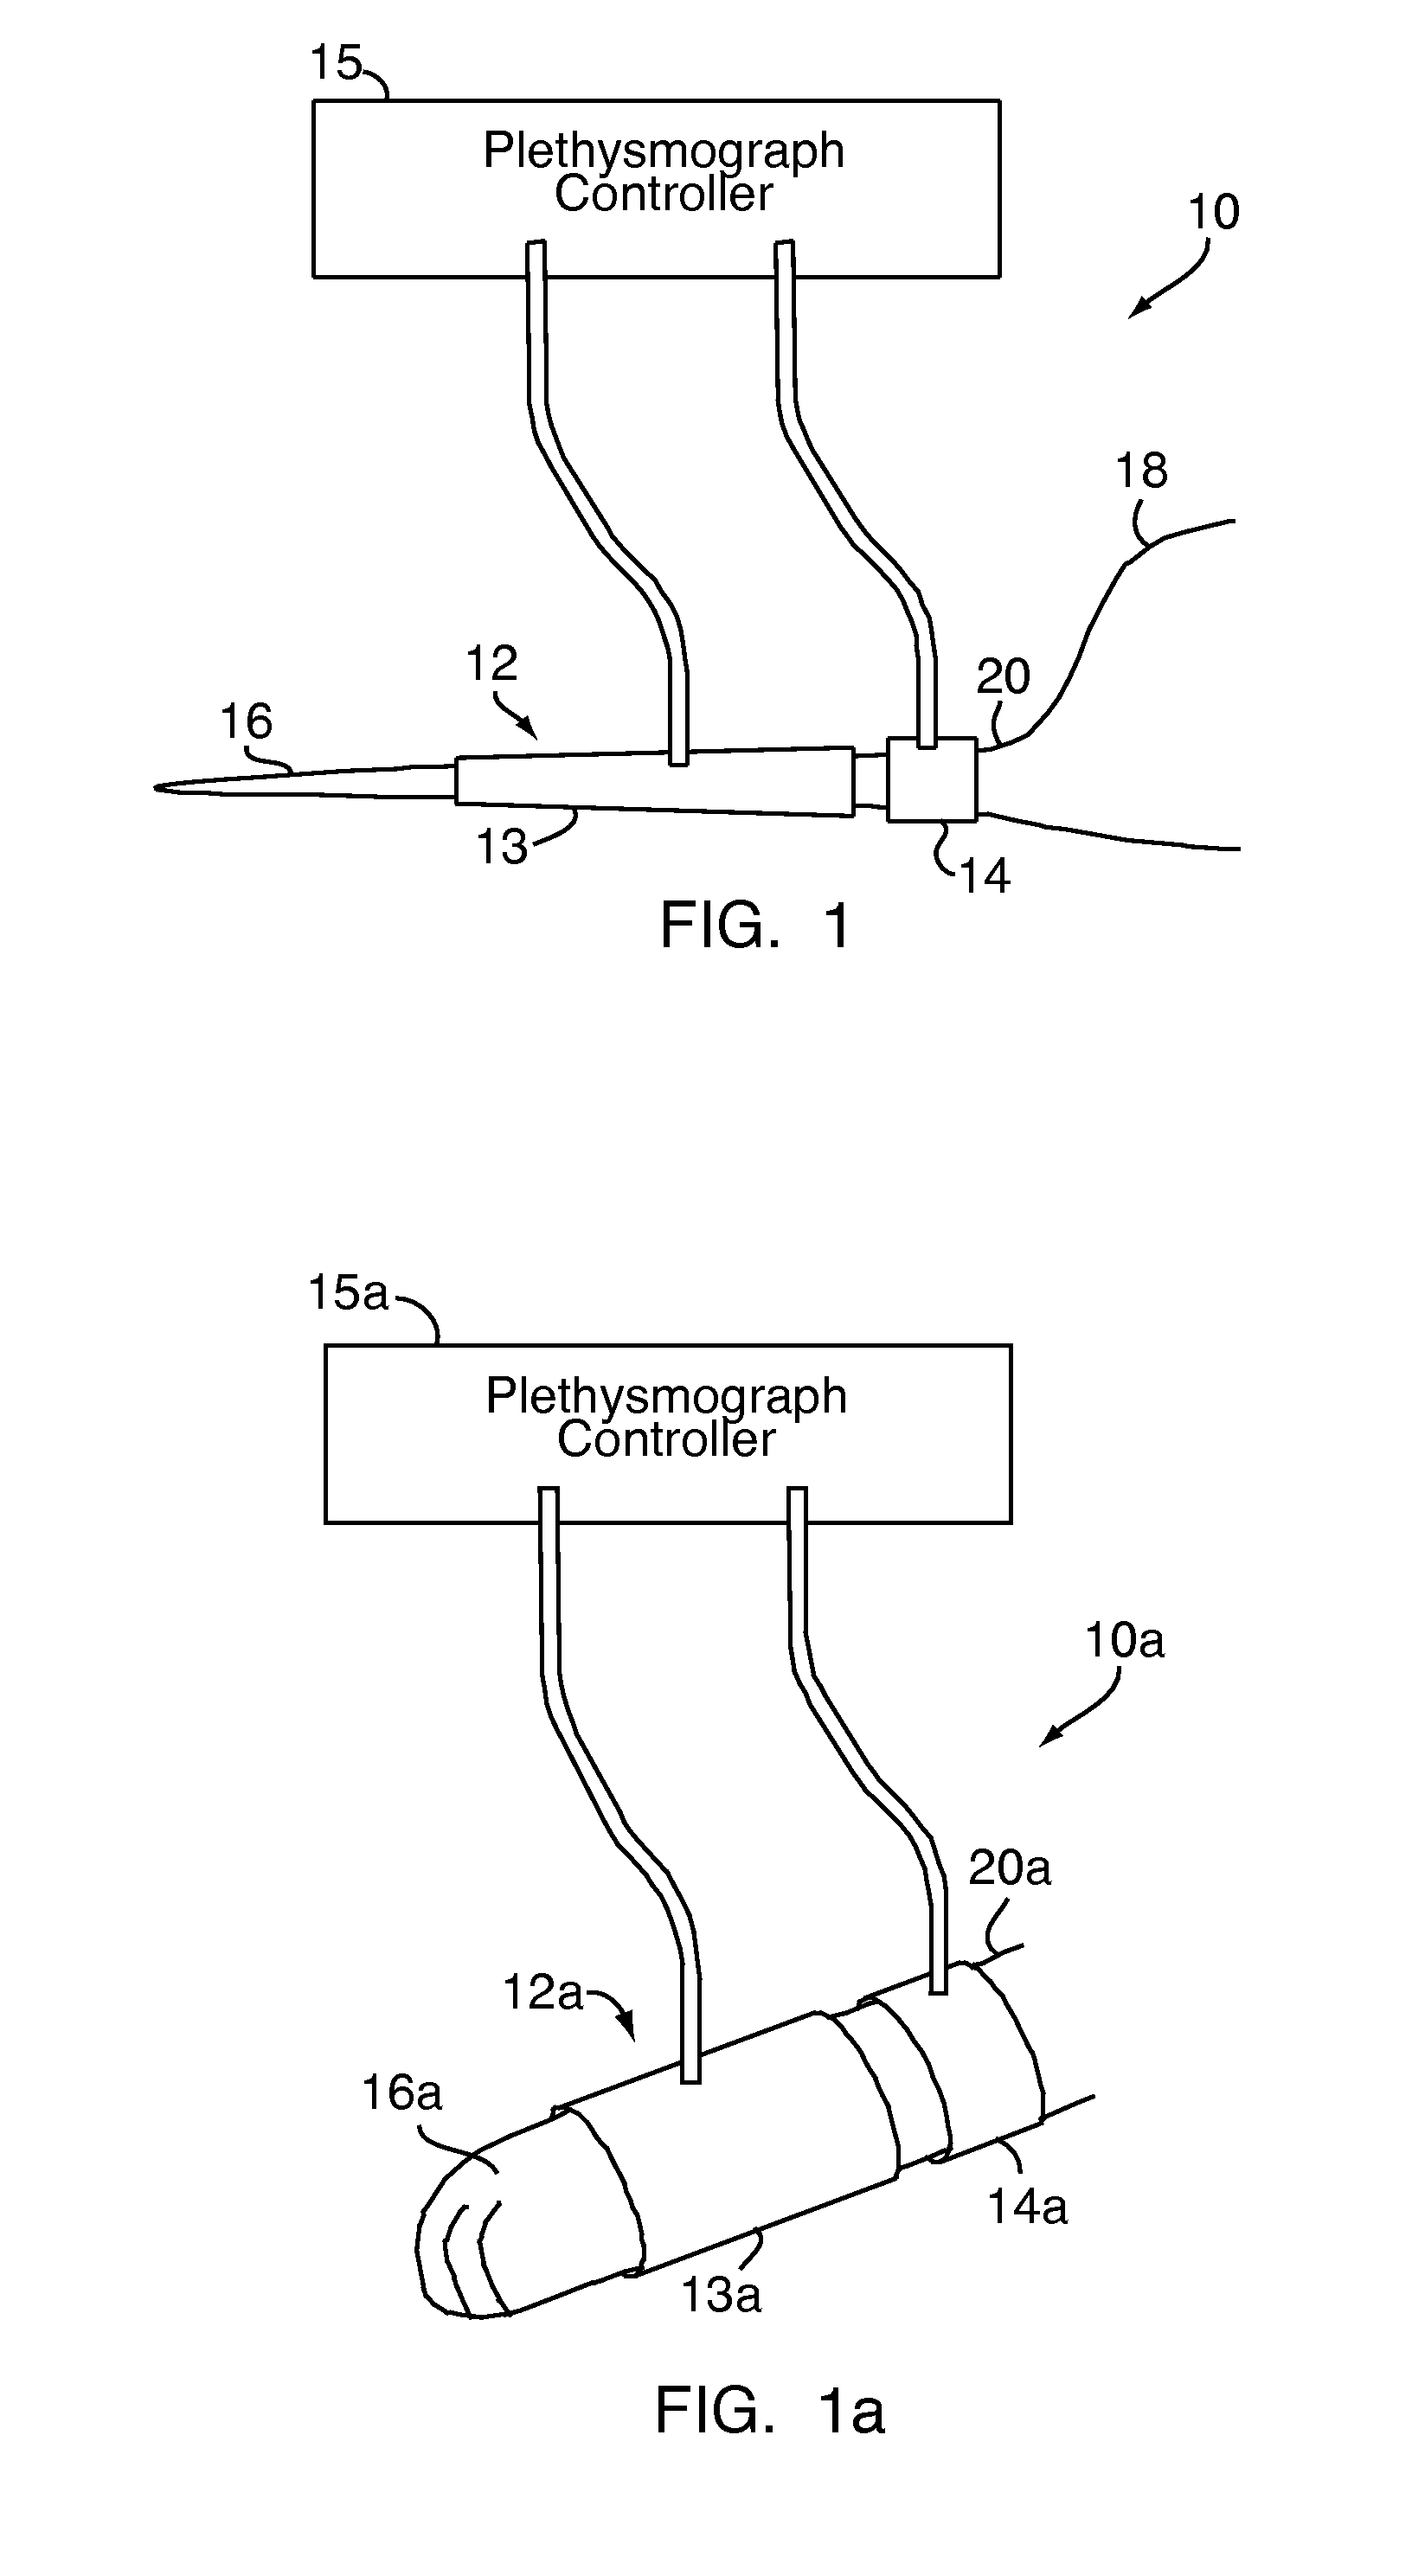 System and method of non-invasive blood pressure measurements and vascular parameter detection in small subjects